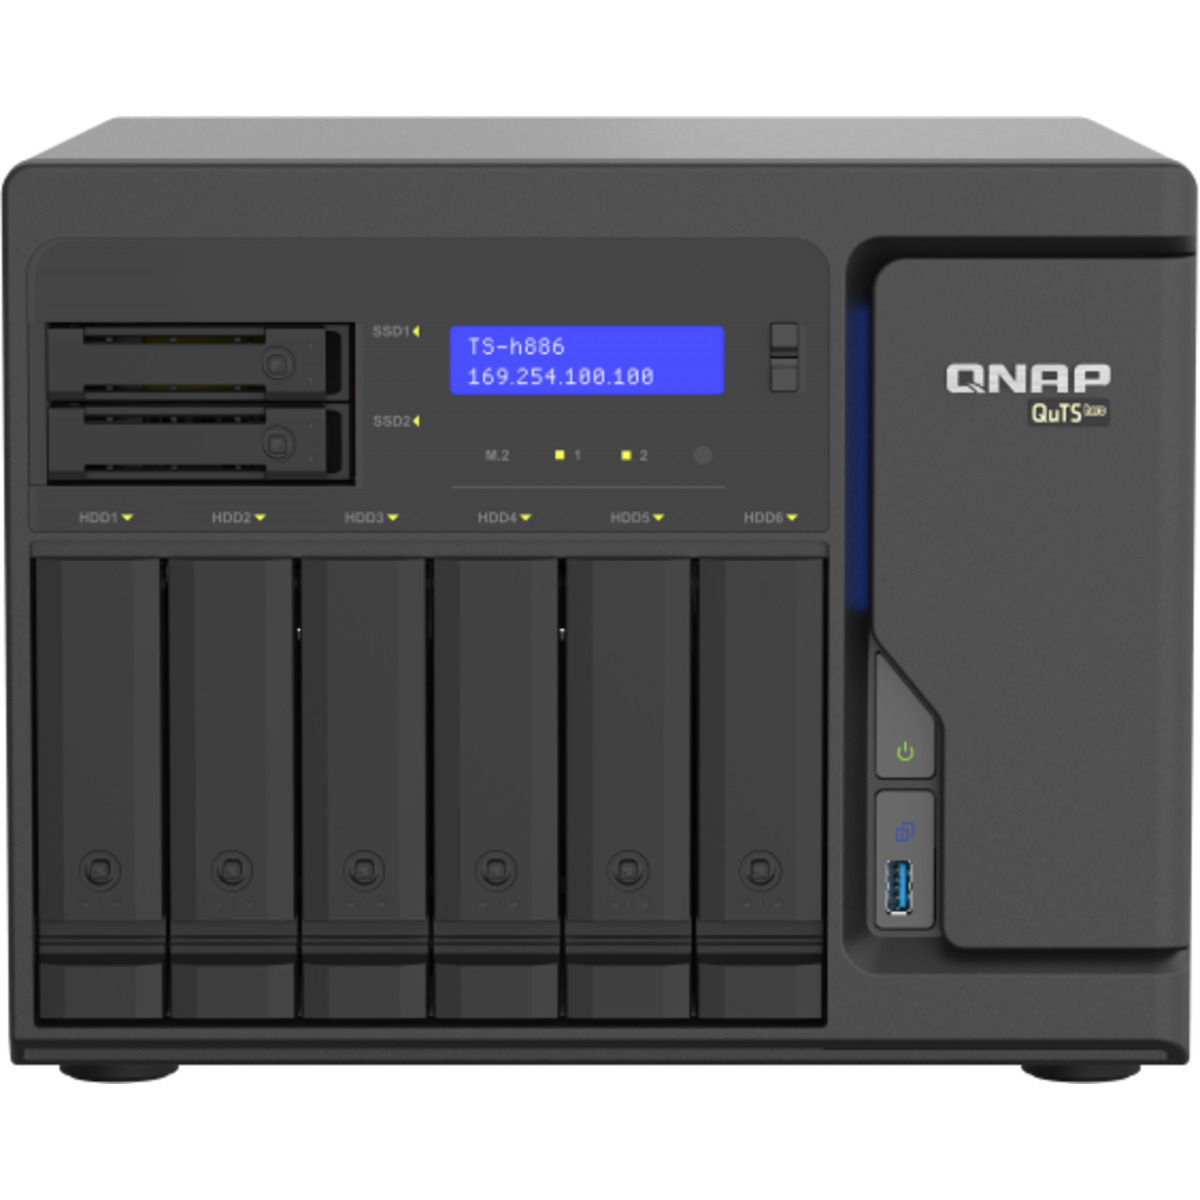 buy $5238 QNAP TS-h886 QuTS hero NAS 132tb Desktop NAS - Network Attached Storage Device 6x22000gb Western Digital Red Pro WD221KFGX 3.5 7200rpm SATA 6Gb/s HDD NAS Class Drives Installed - Burn-In Tested - ON SALE - nas headquarters buy network attached storage server device das new raid-5 free shipping simply usa TS-h886 QuTS hero NAS